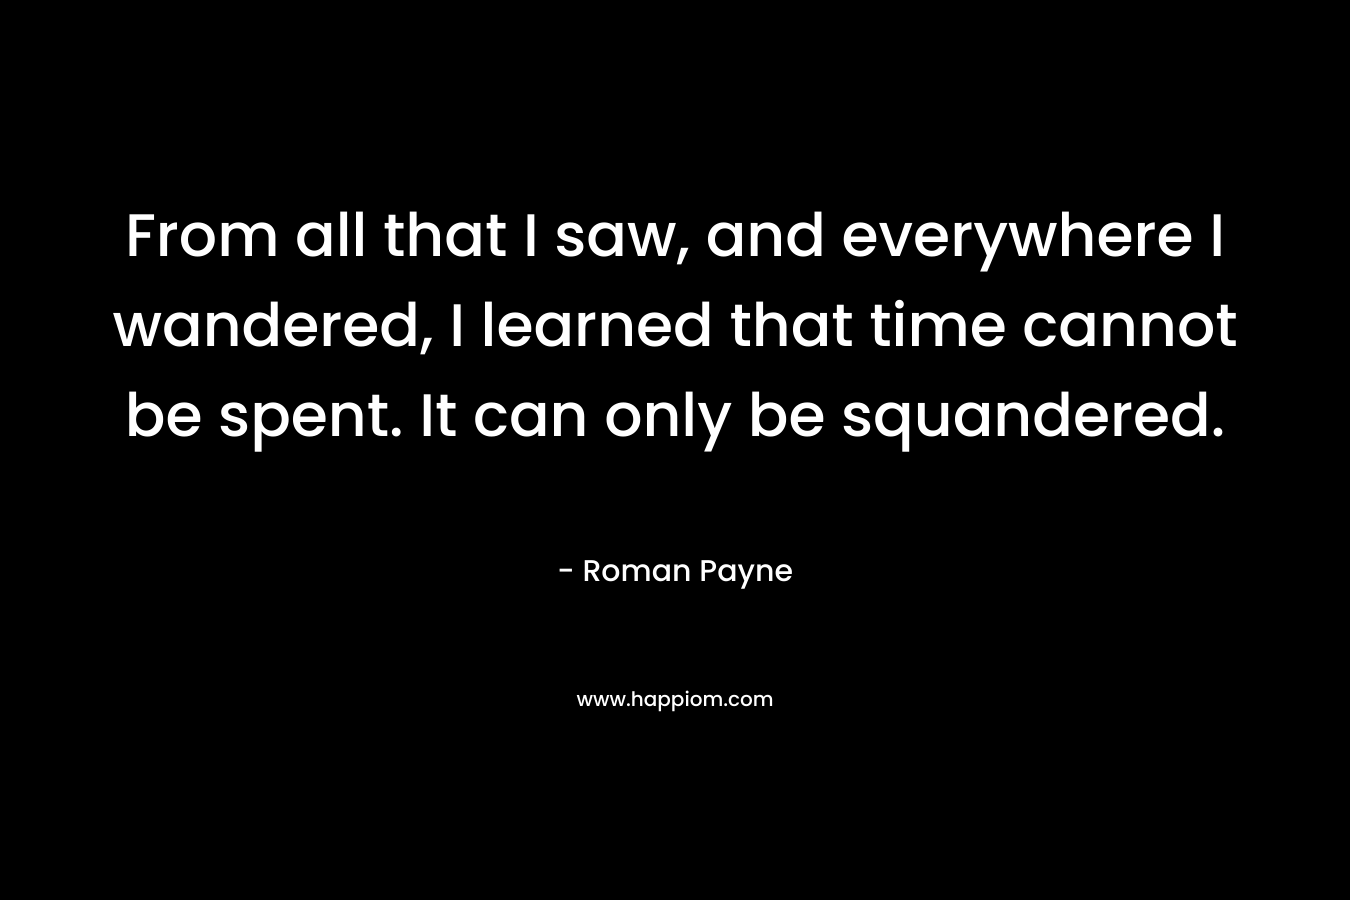 From all that I saw, and everywhere I wandered, I learned that time cannot be spent. It can only be squandered. – Roman Payne